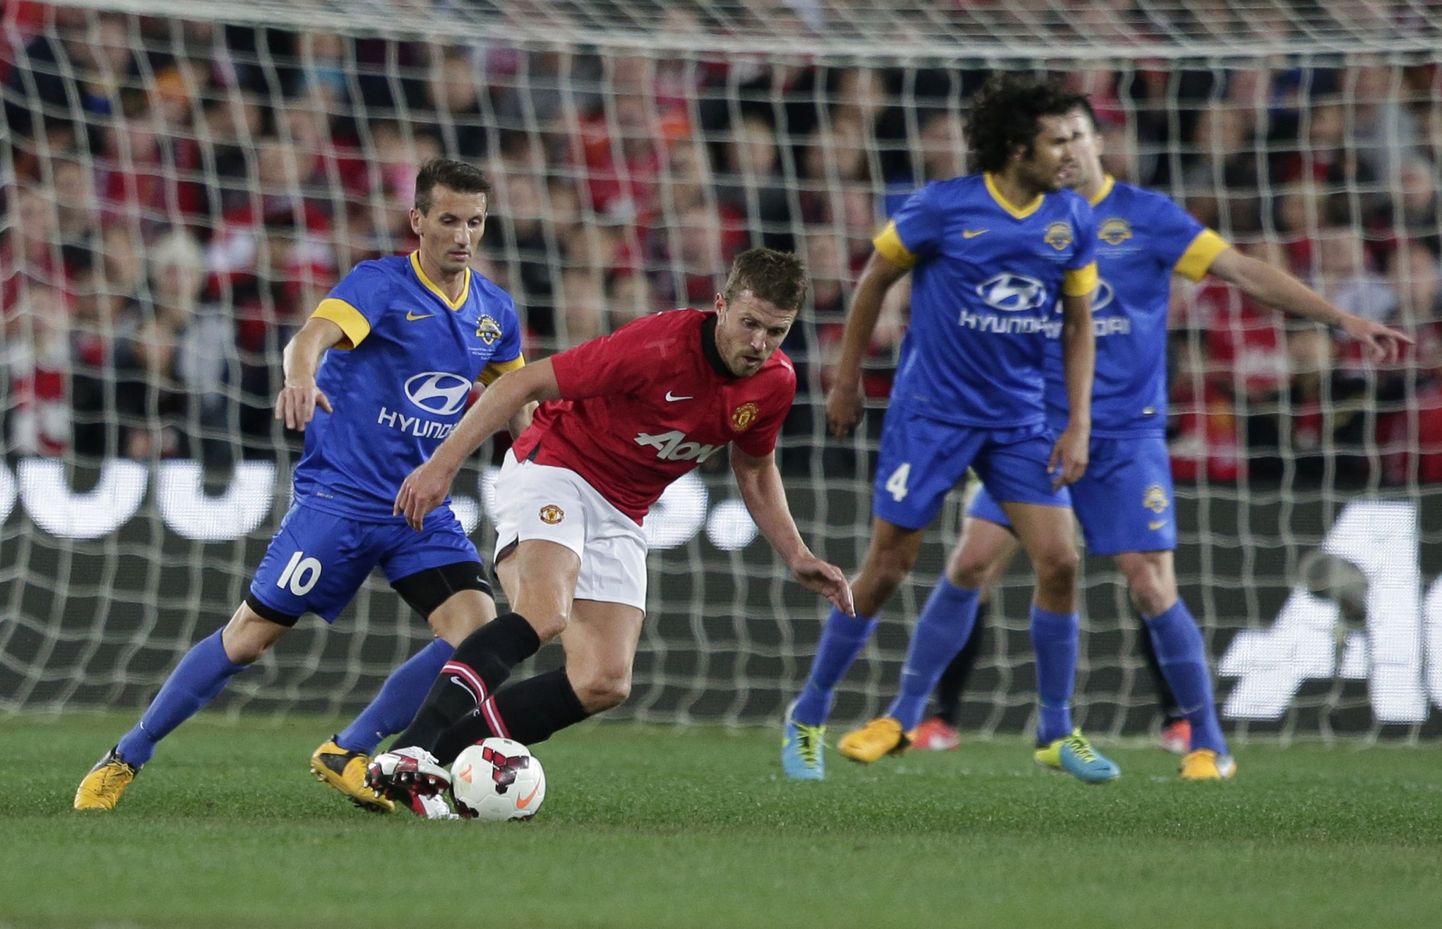 Manchester United Michael Carrick, second from left, steals the ball off Sydney Allstars' Liam Miller, left,during a exhibition match in Sydney, Australia, Saturday, July 20, 2013.(AP Photo/Rob Griffith) / SCANPIX Code: 436